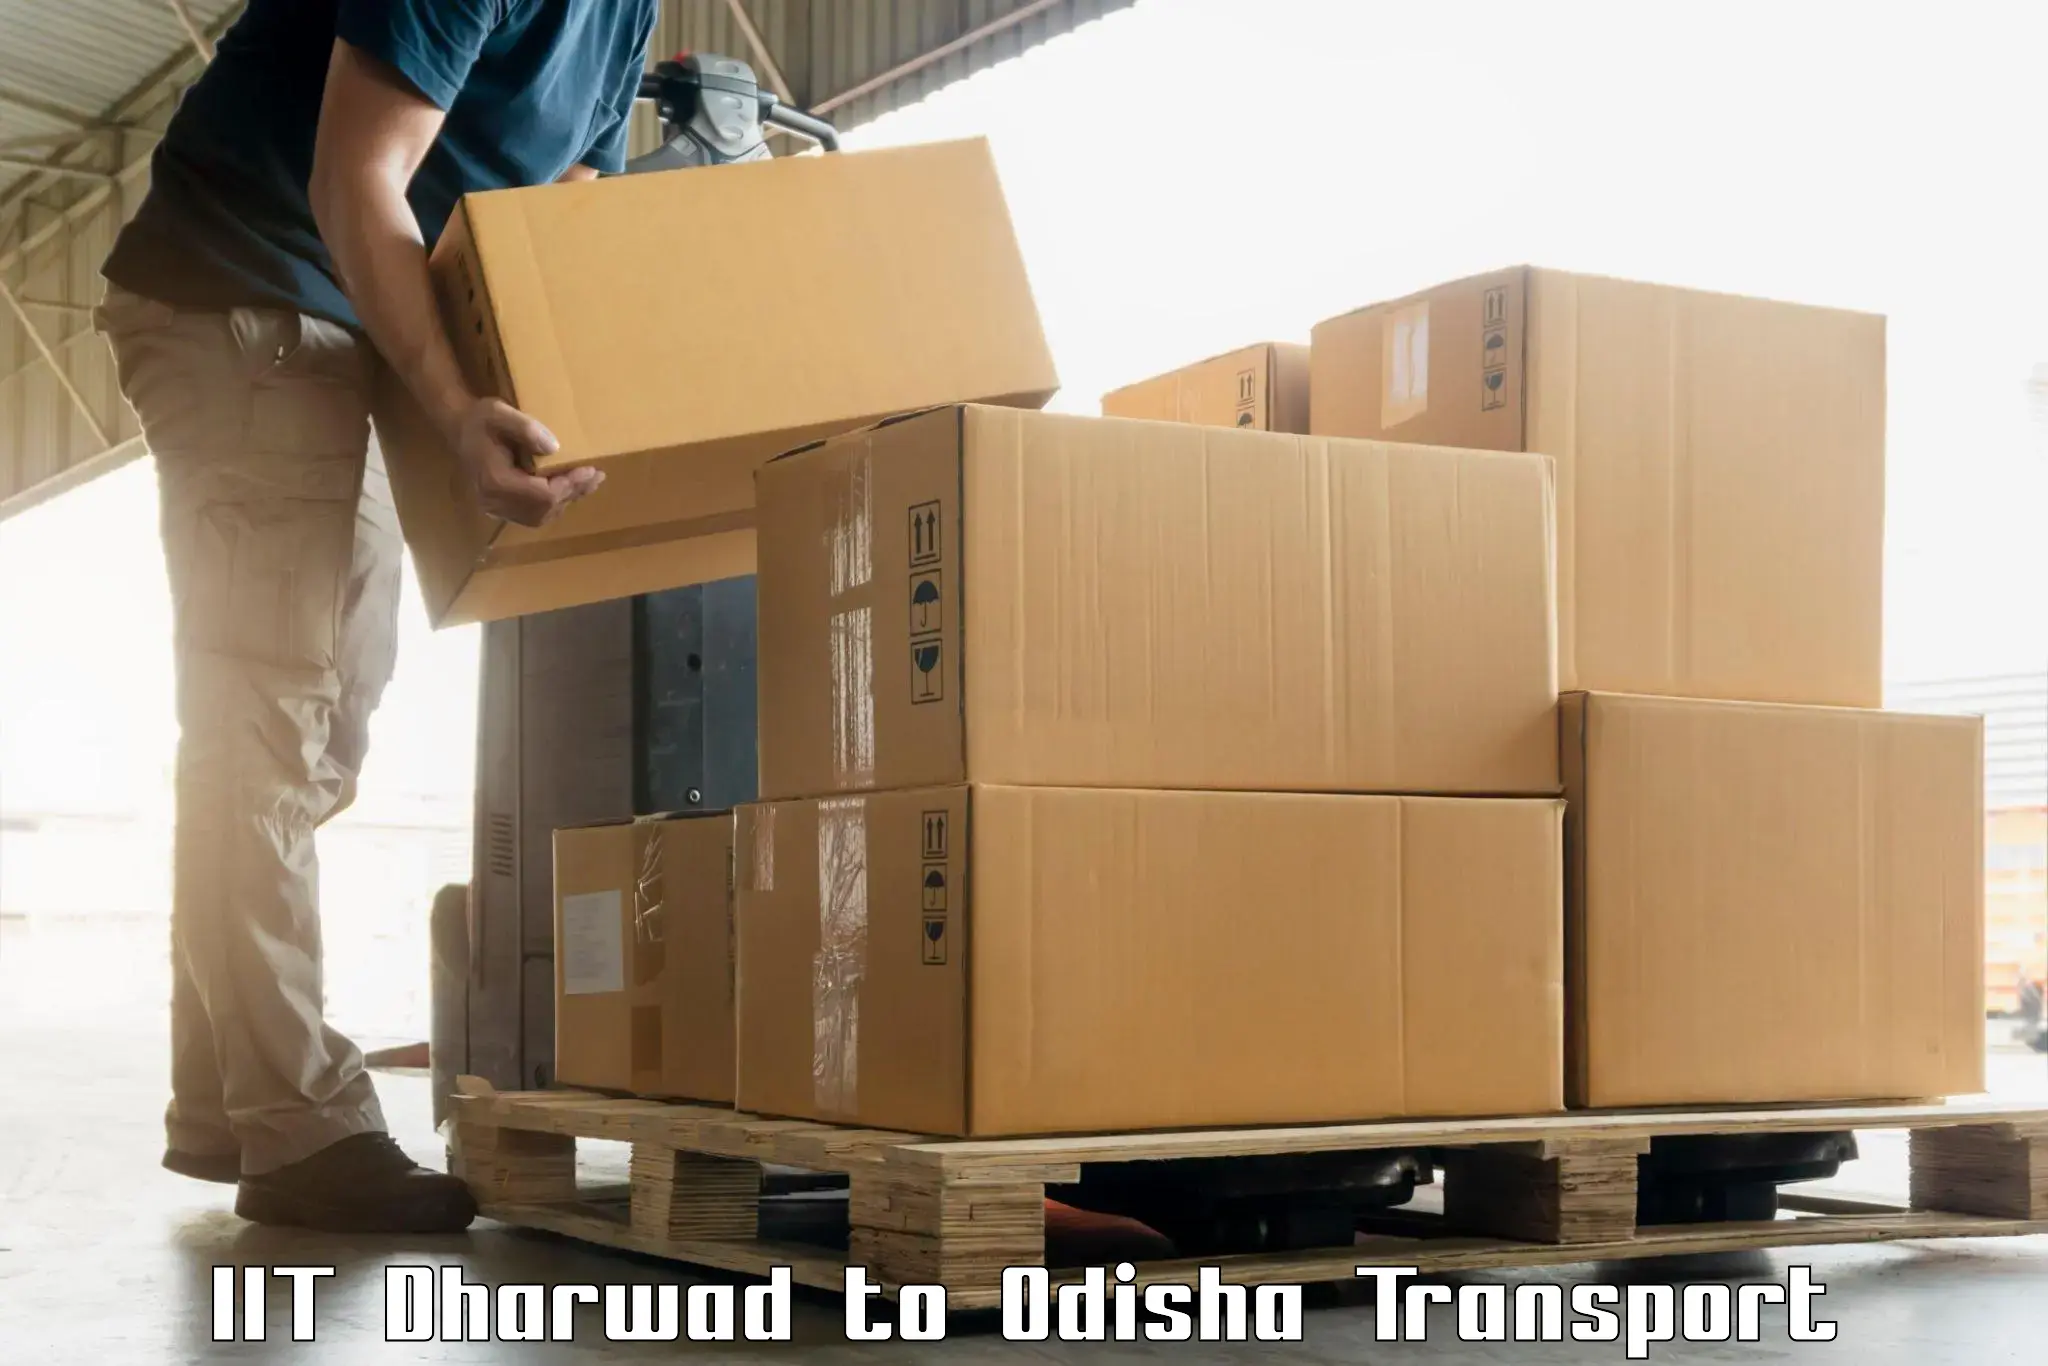 Online transport service IIT Dharwad to Kendrapara